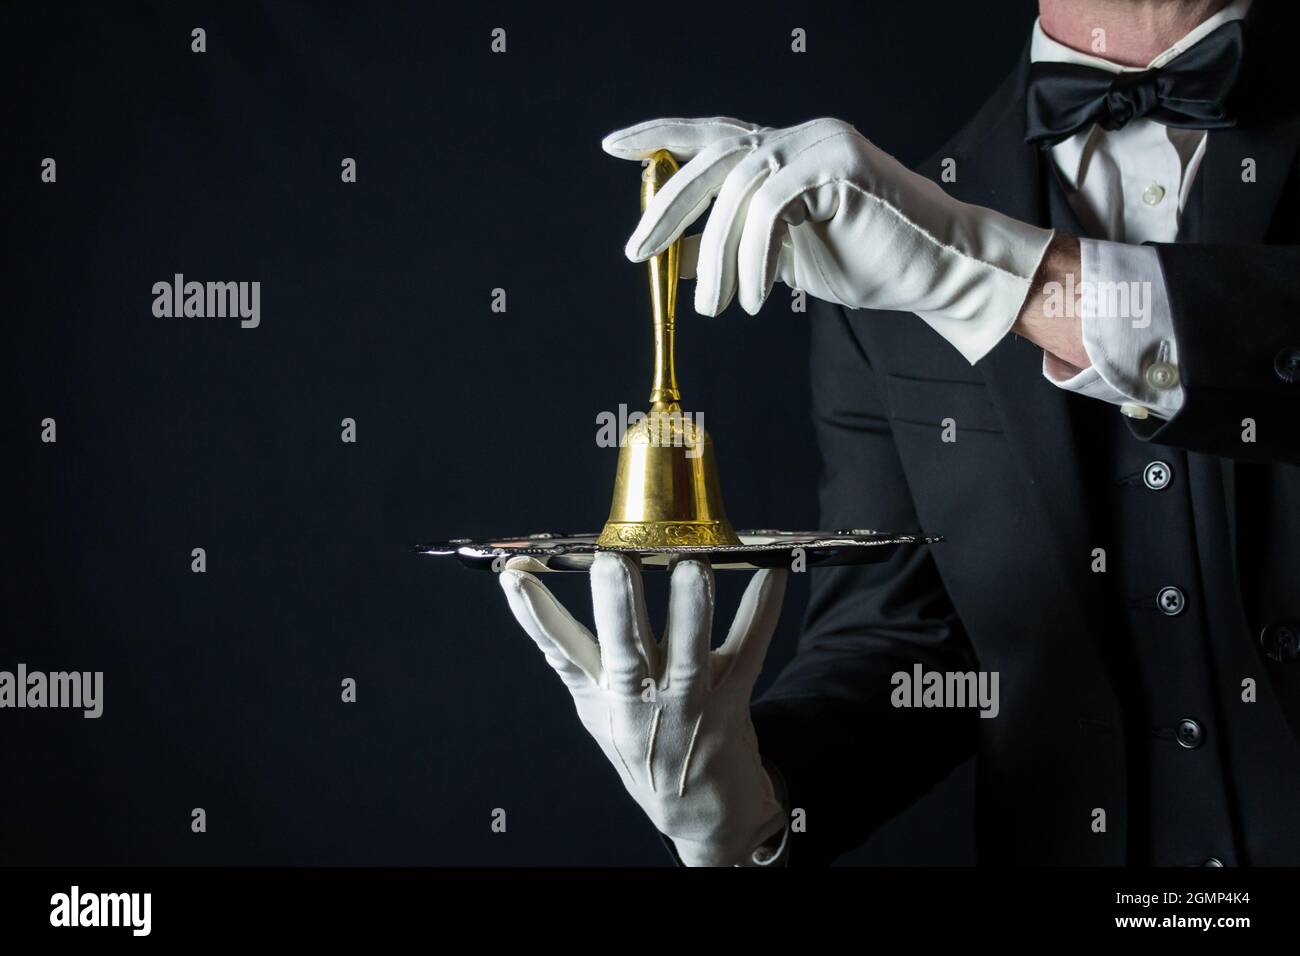 Butler or Waiter in Dark Suit and White Gloves Holding Gold Bell on Silver Tray. Concept of Service Industry and Professional Hospitality. Stock Photo